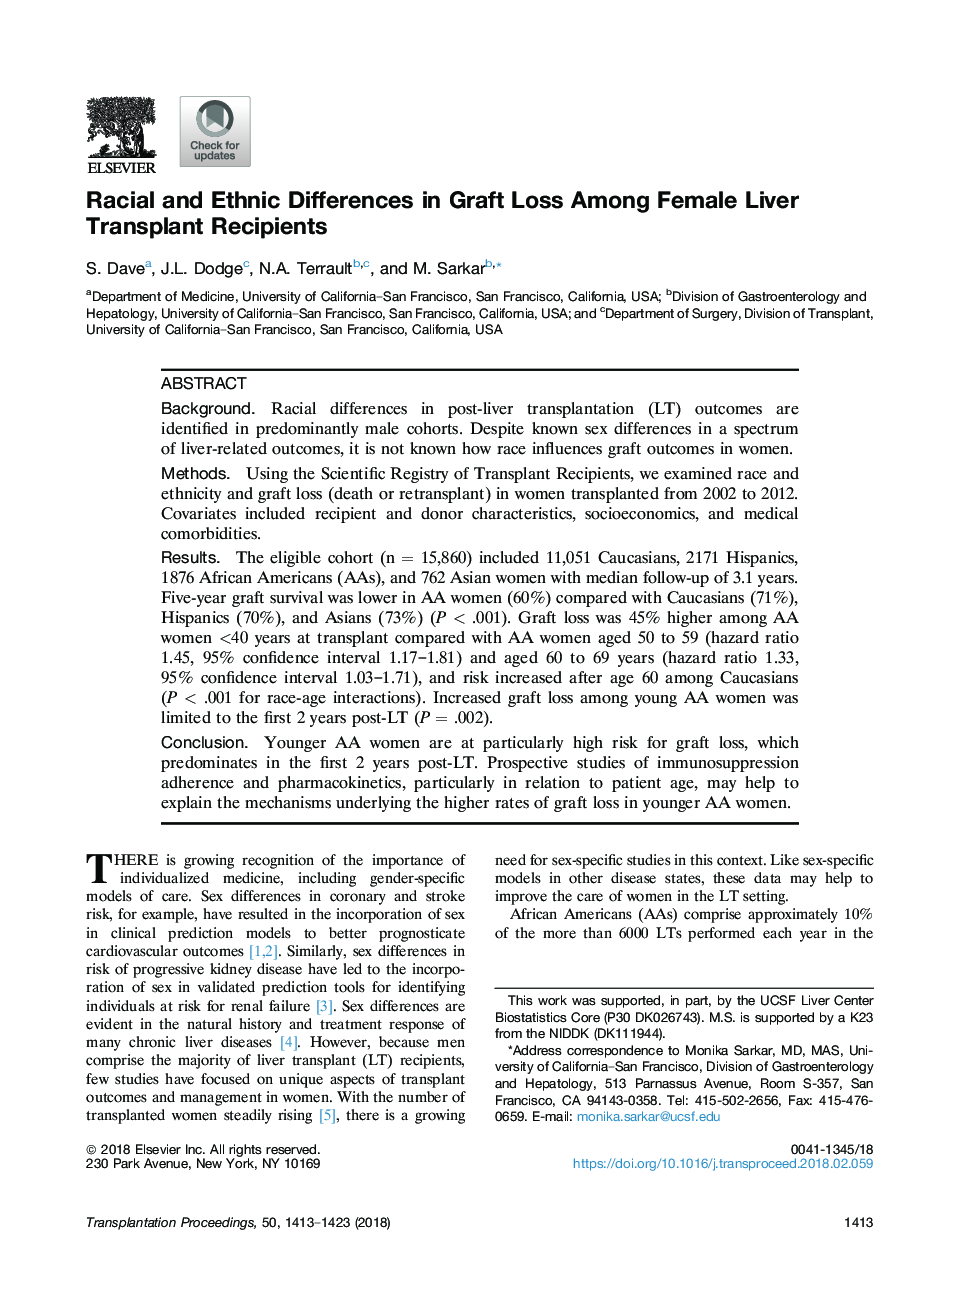 Racial and Ethnic Differences in Graft Loss Among Female Liver Transplant Recipients